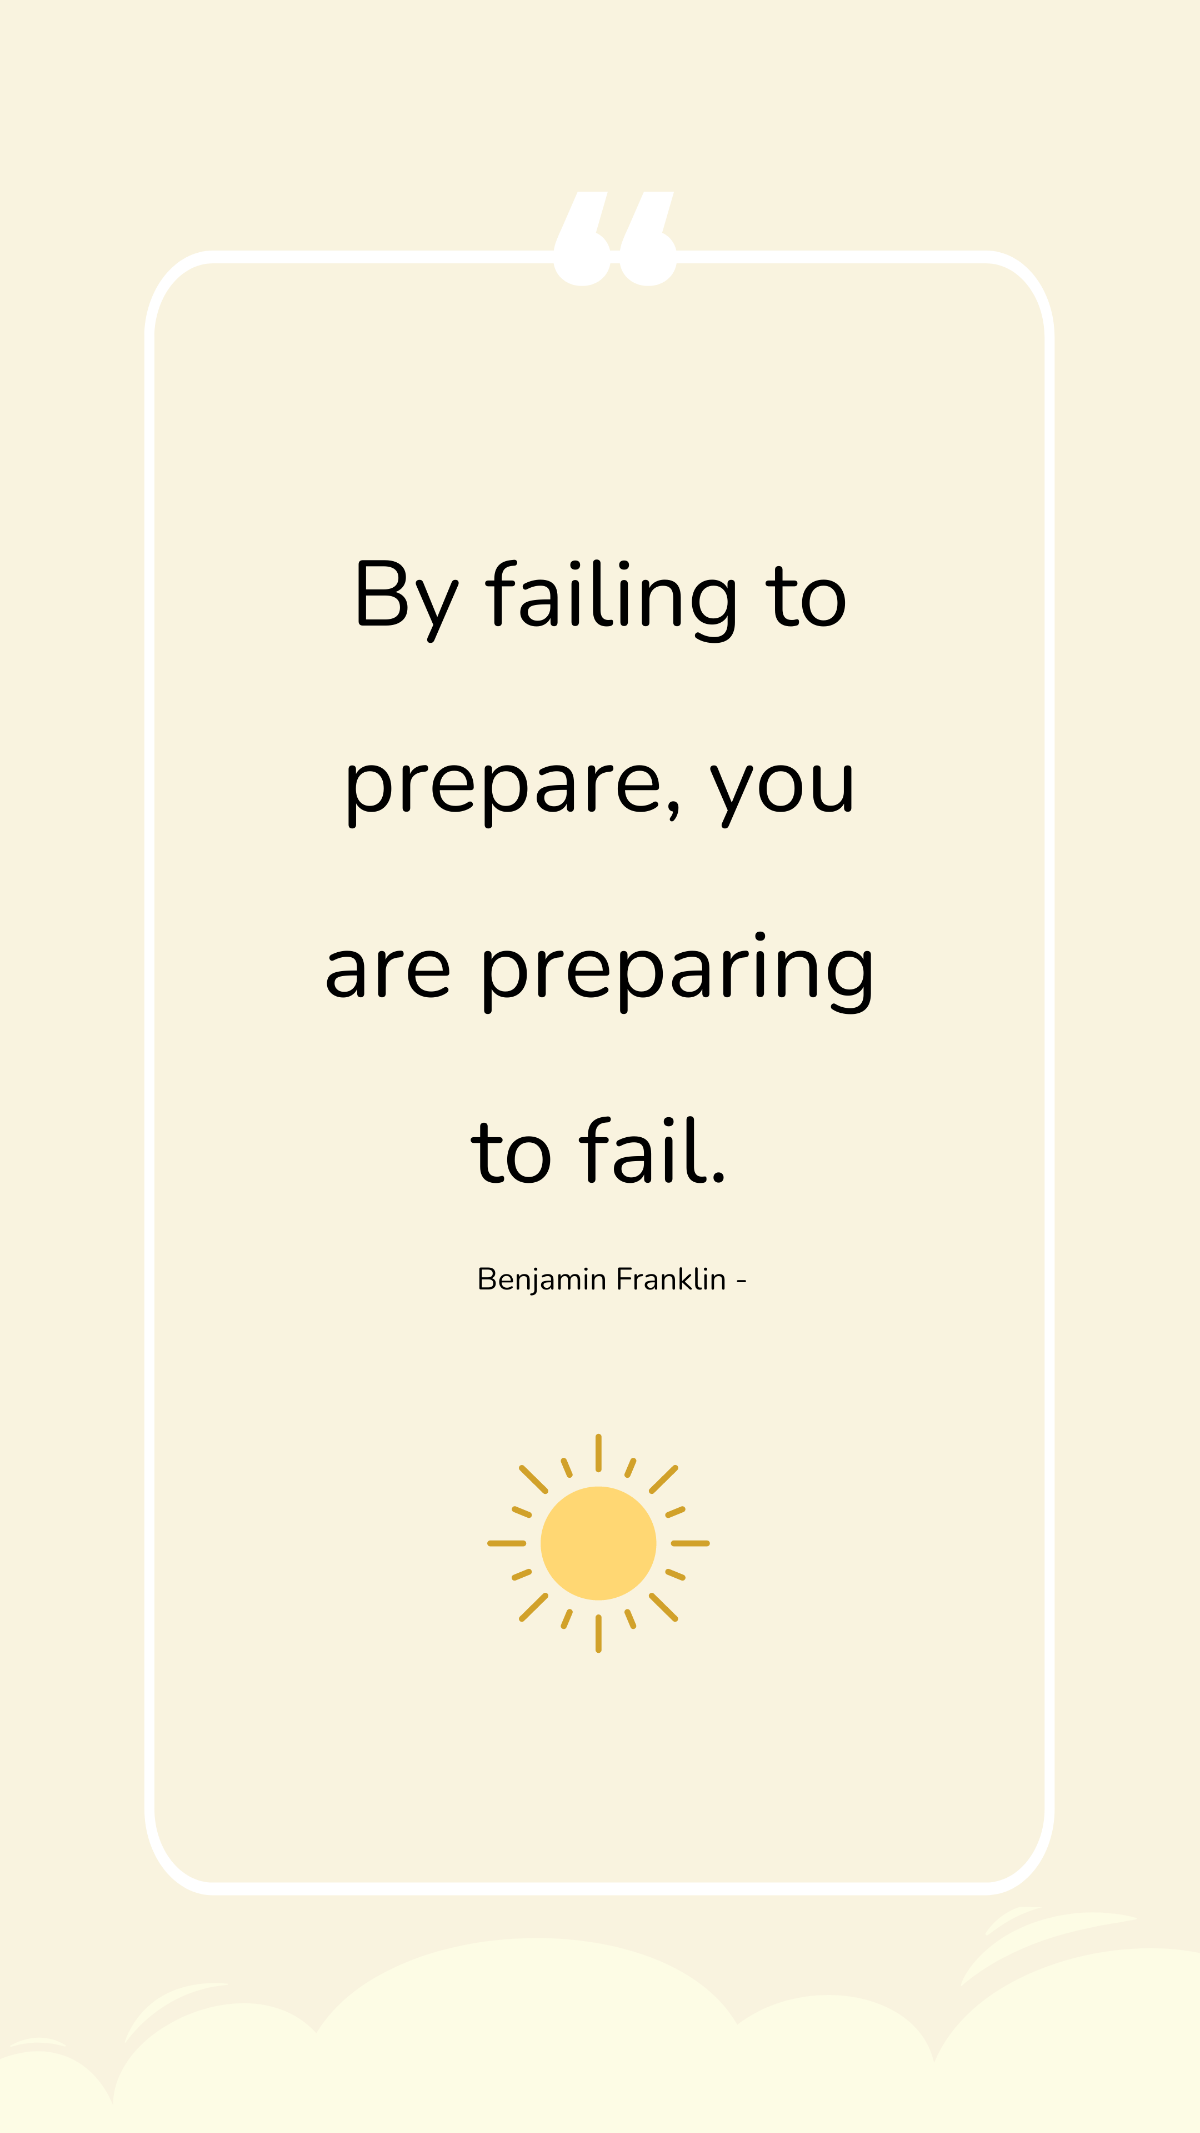 Benjamin Franklin - By failing to prepare, you are preparing to fail.